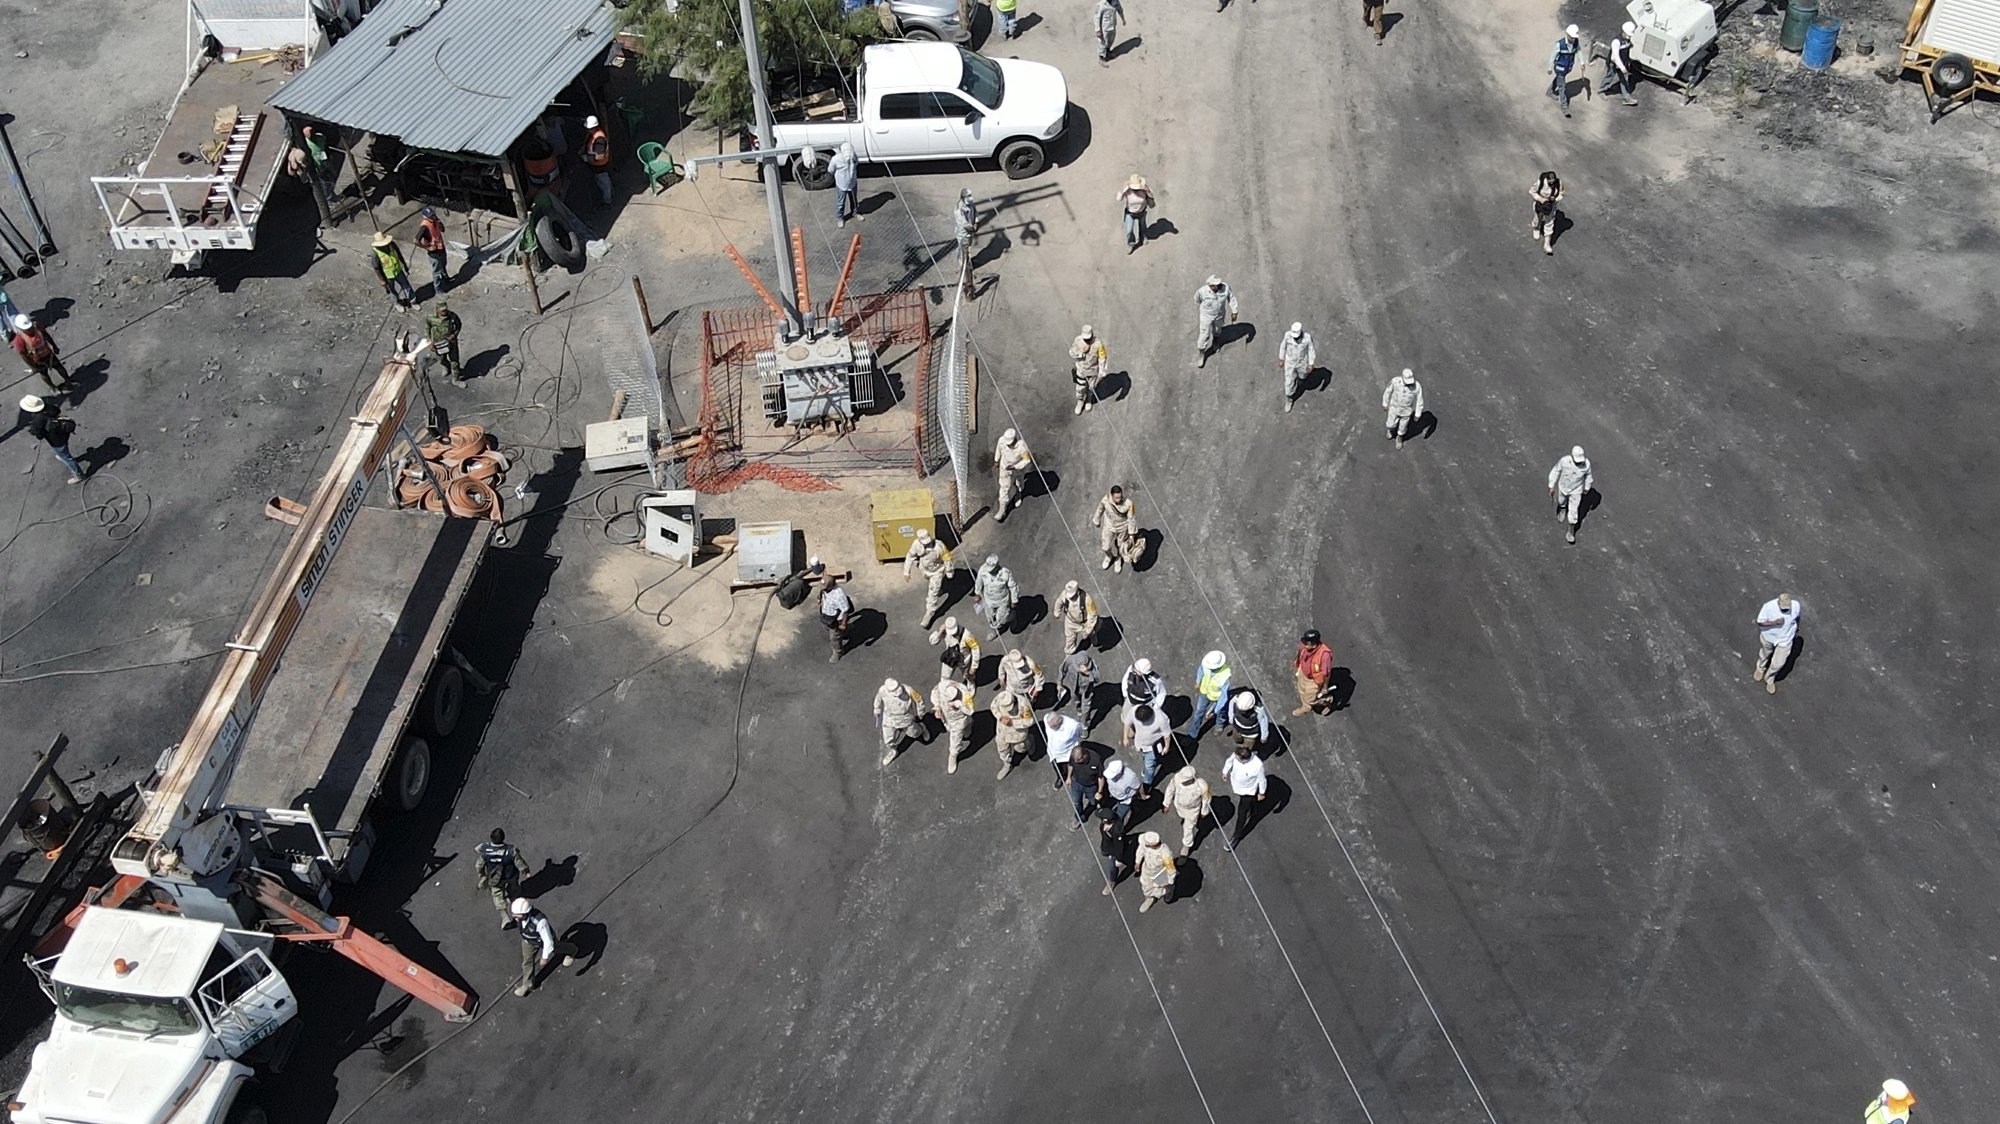 epa10110968 Photograph taken with a drone shows the arrival of the president of Mexico AndrÃ©s Manuel LÃ³pez Obrador to the area where 10 miners are trapped in the municipality of Sabinas in Coahuila, Mexico, 07 August 2022. LÃ³pez Obrador said that the priority is to rescue the 10 miners who since Wednesday were trapped in a mine in Sabinas, Coahuila, in the north of the country after a landslide.  EPA/Antonio Ojeda